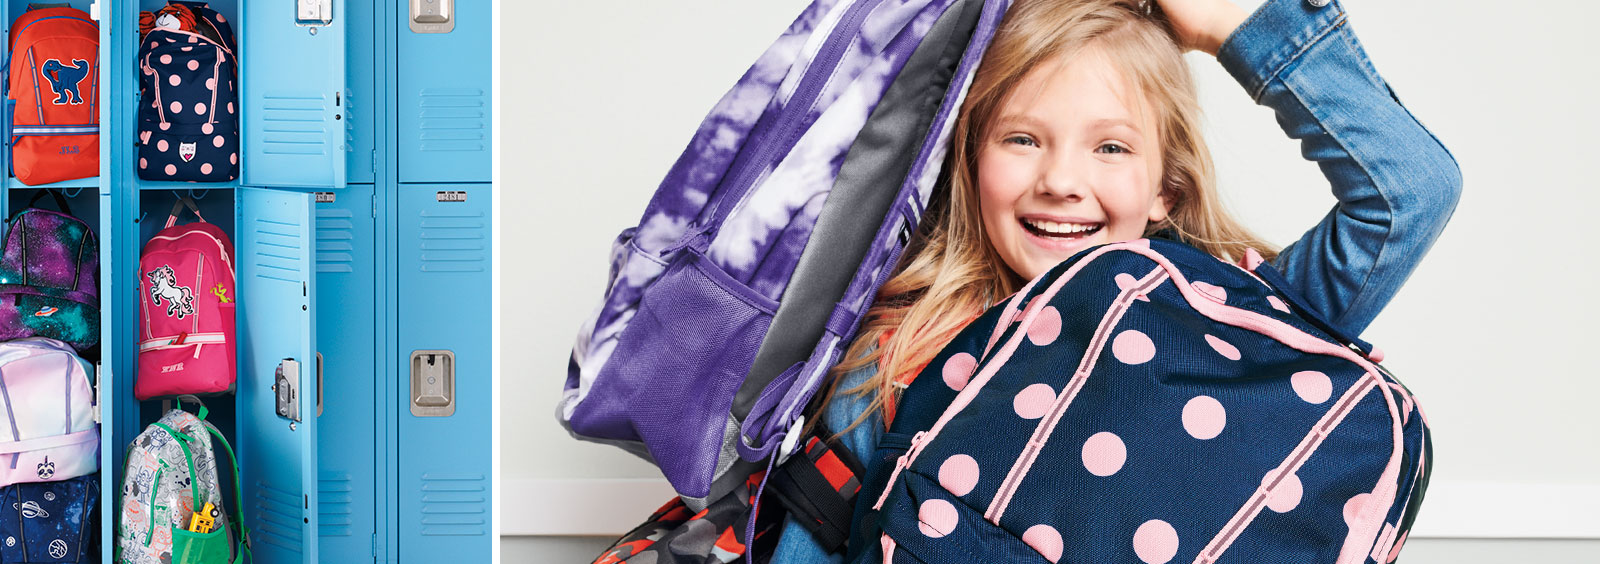 6 Must-Have Back-to-School Items You Didn't Realize You Needed